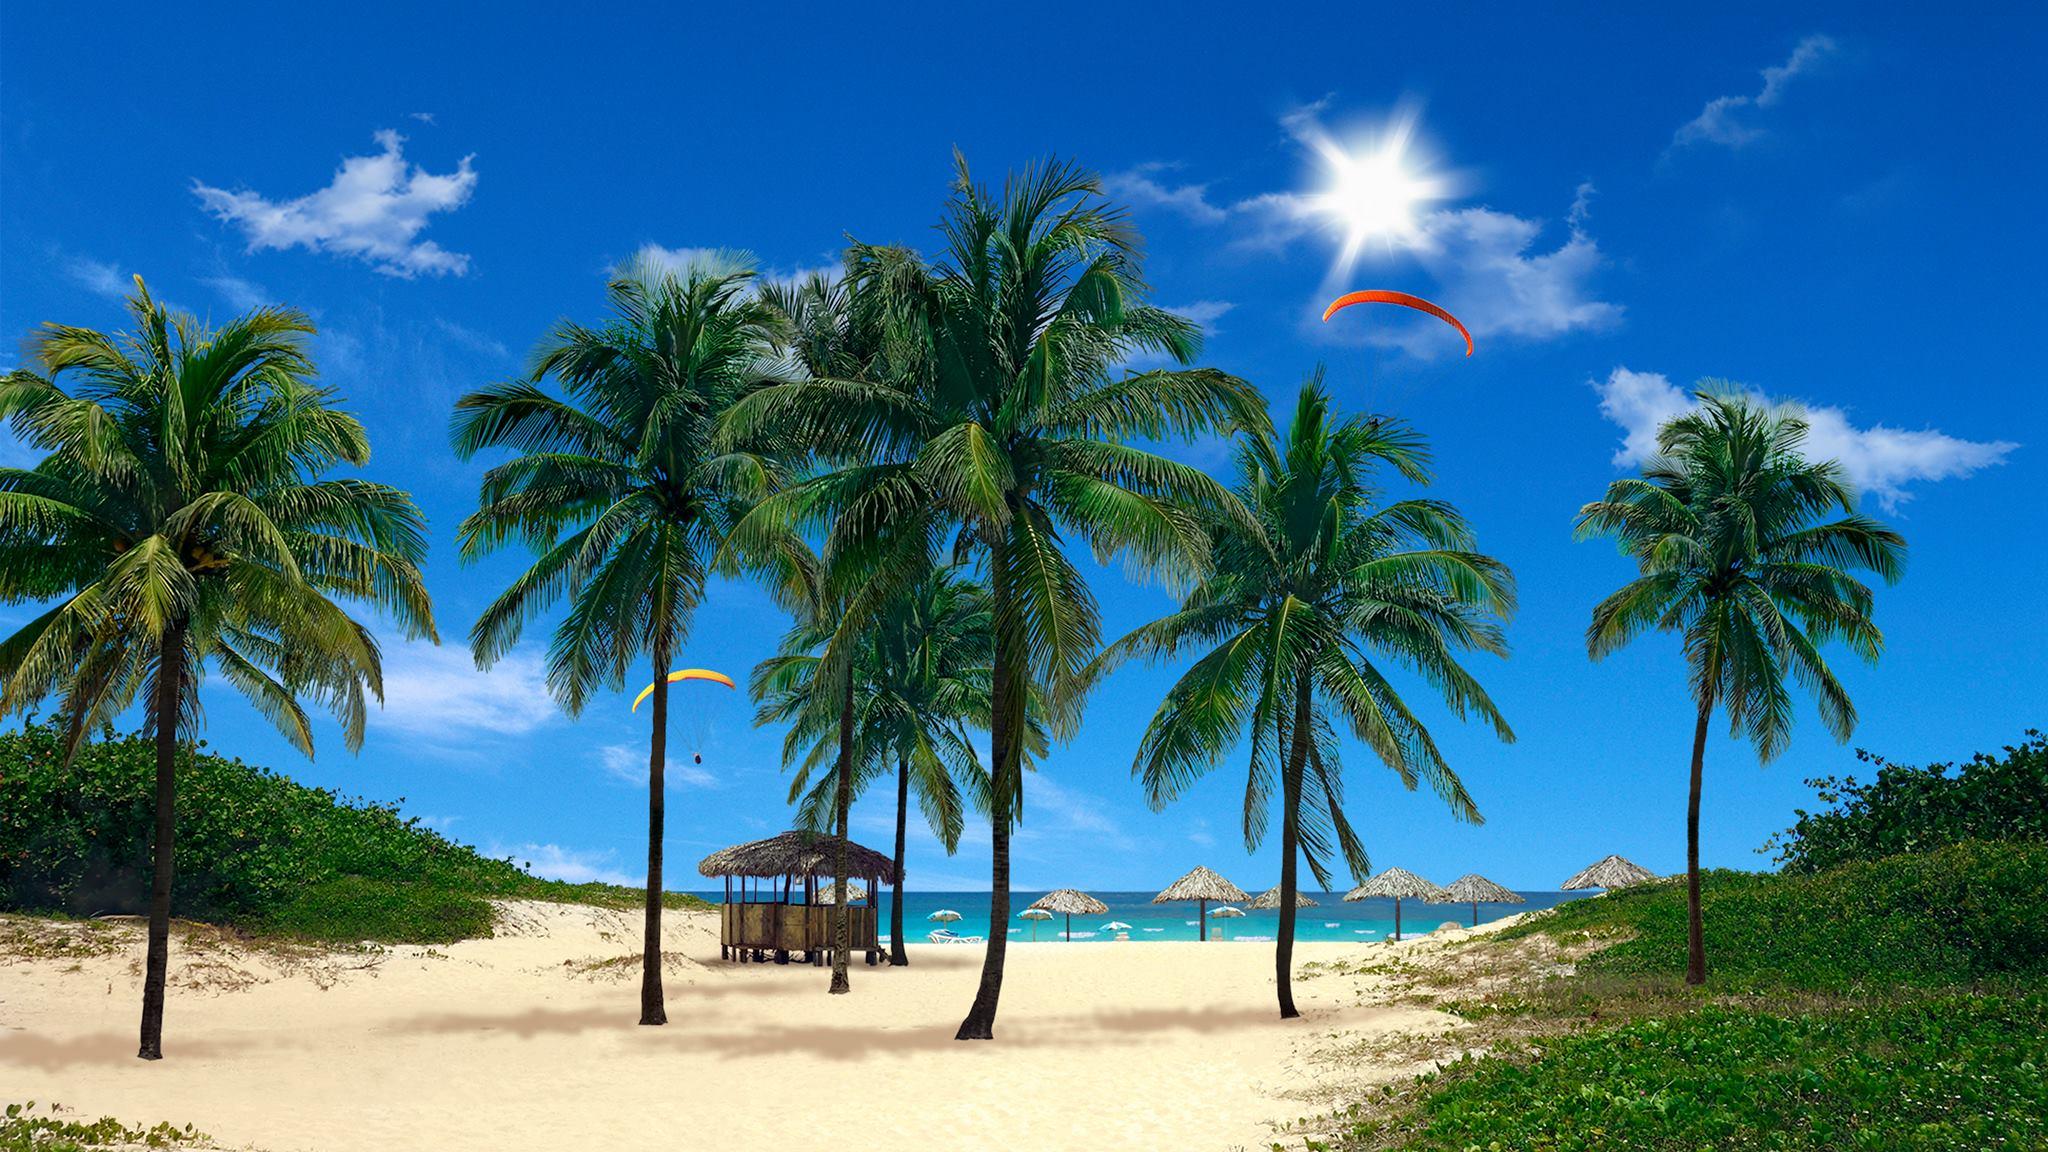 Real Snowfall & Beach Palms 3D are two live wallpaper to spruce up